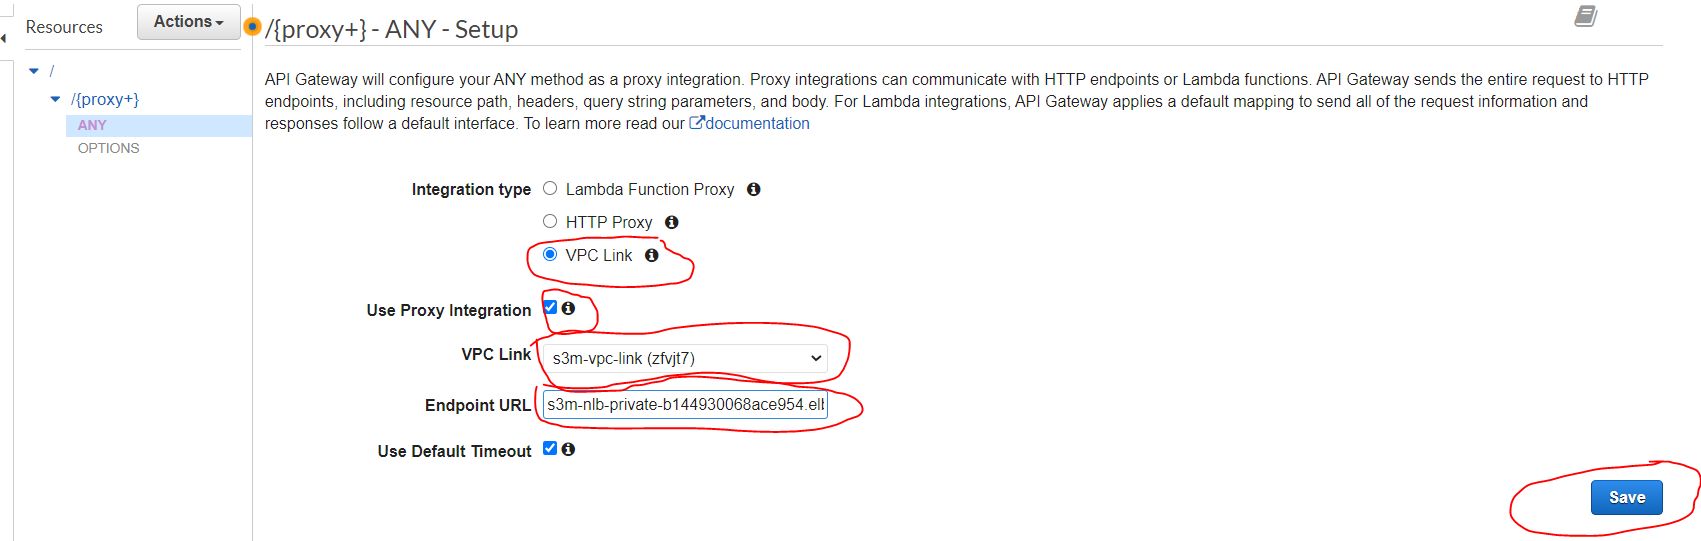 Api Gateway Proxy mode with NLB and VPC Link